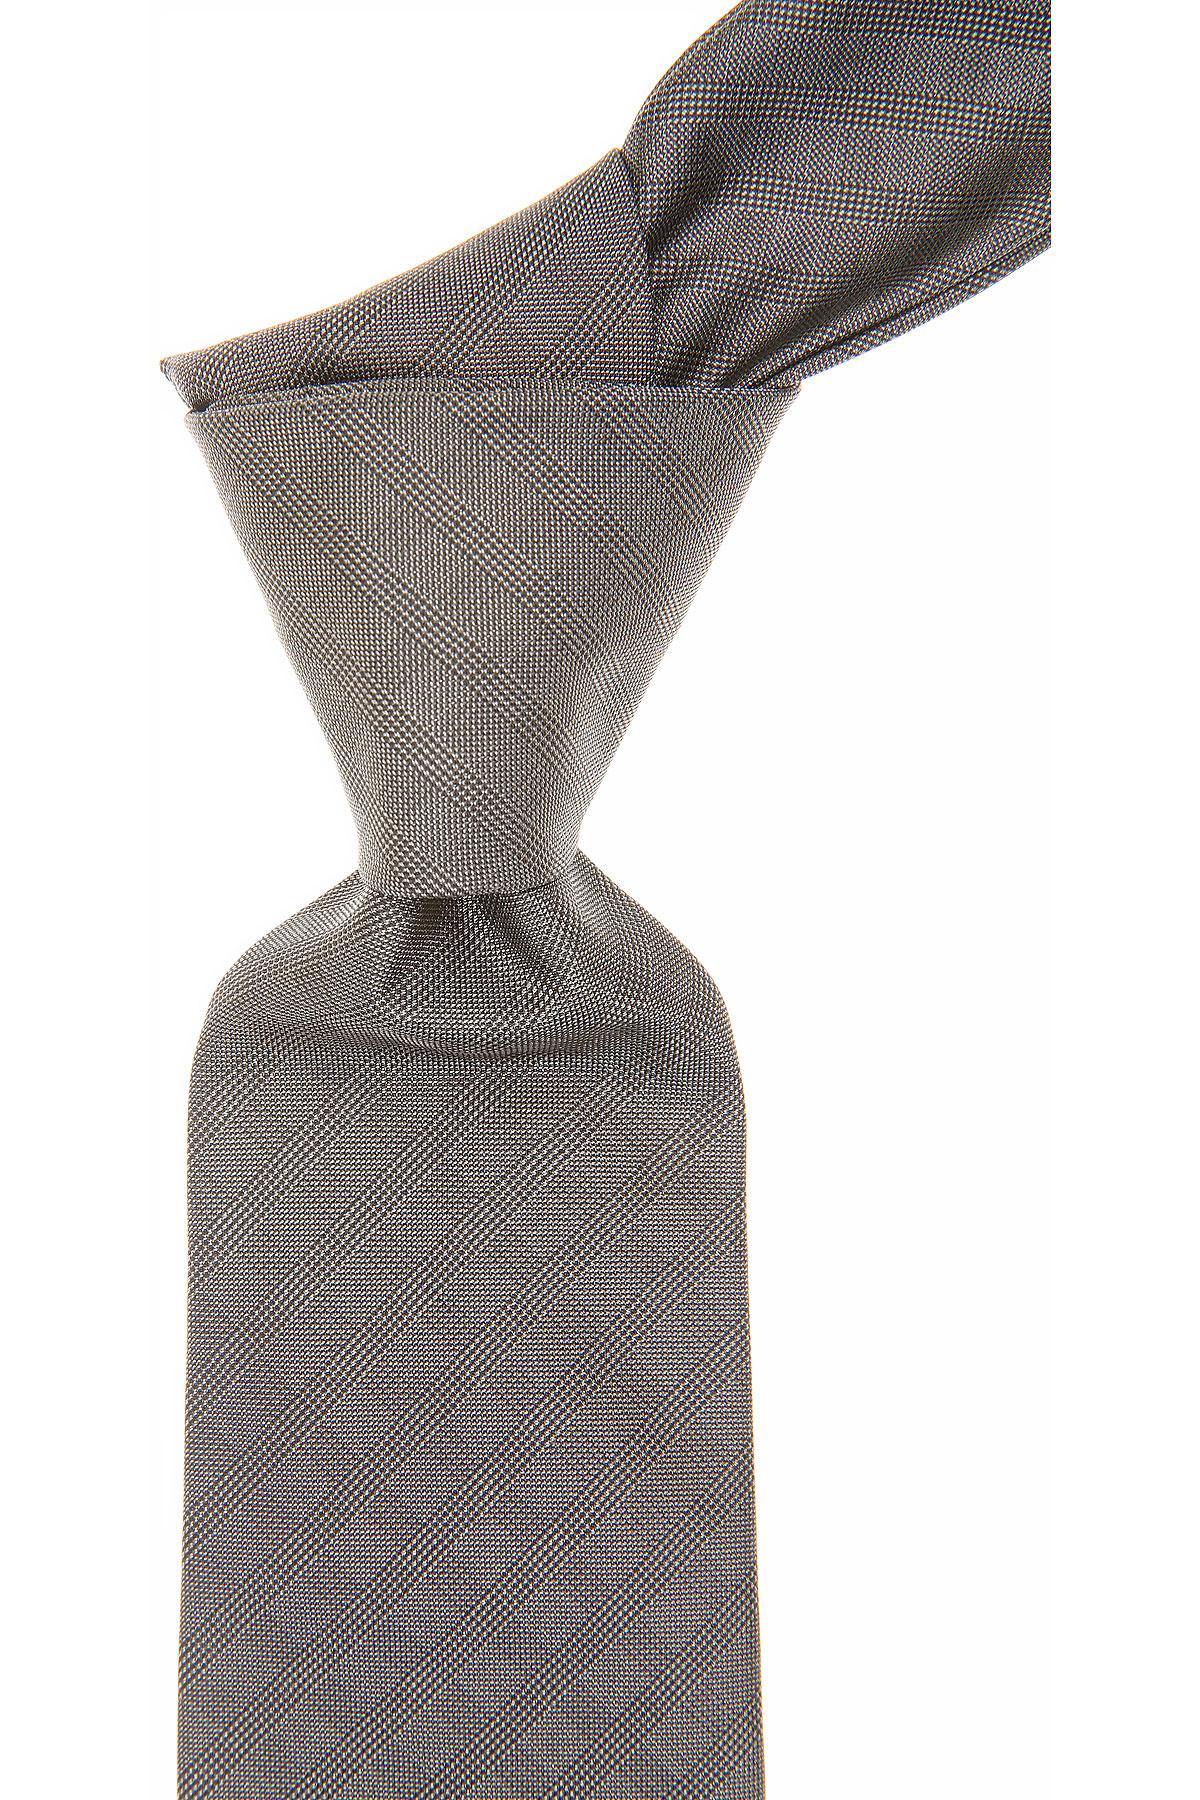 Givenchy Silk Ties in Graphite (Gray) for Men - Save 41% - Lyst